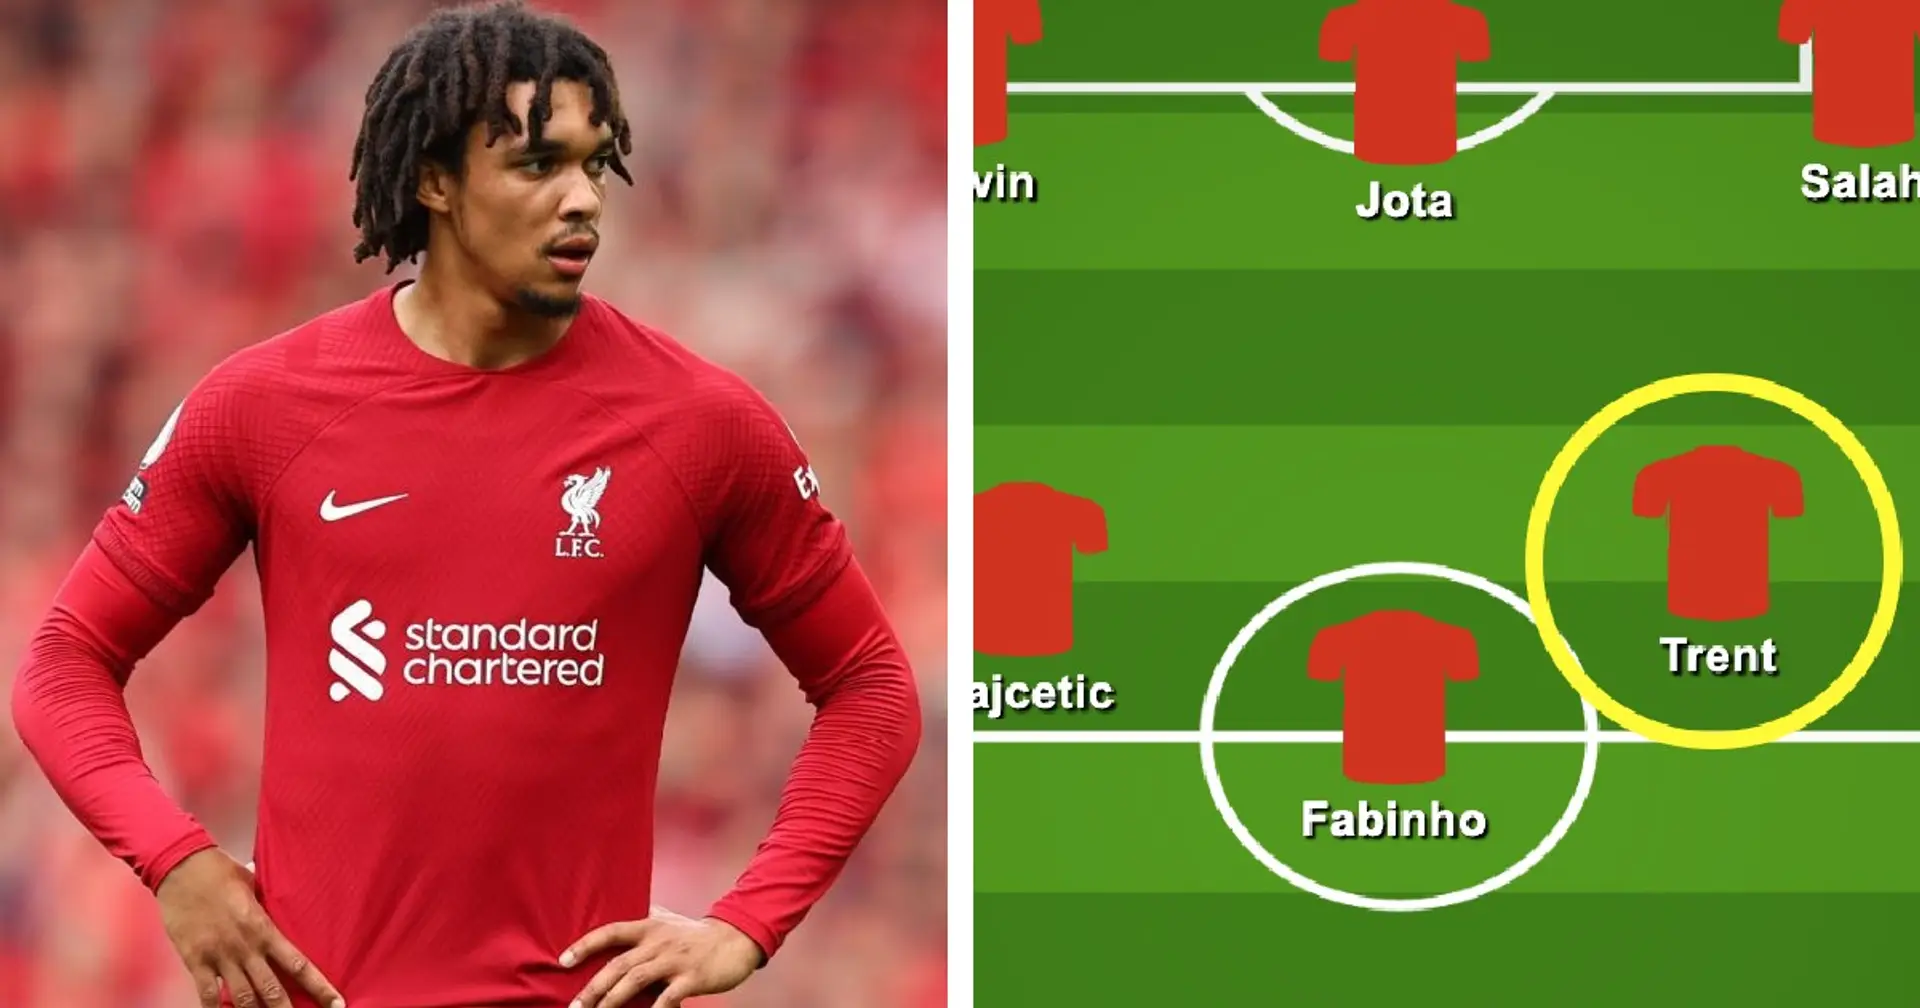 'He's the closest Liverpool have to De Bruyne or Gerrard': Carragher urges Klopp to move Trent to midfield